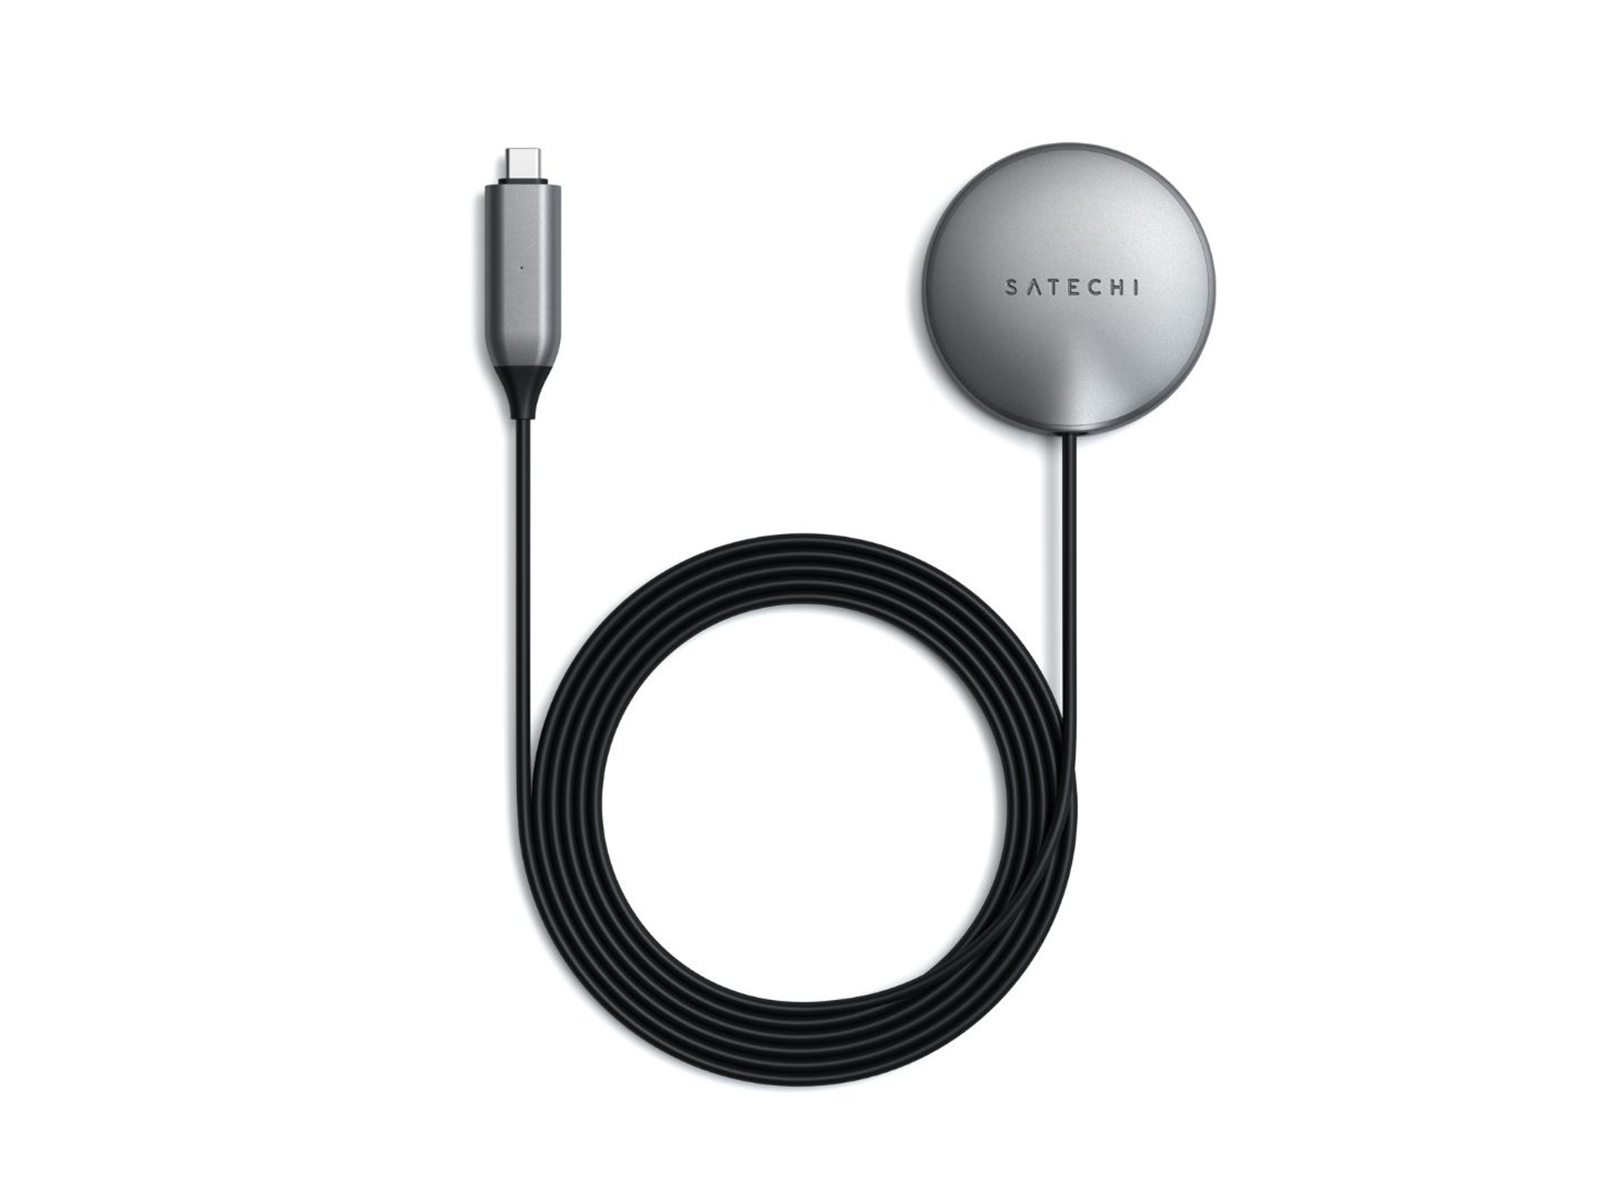 Kro Downtown religion Køb Satechi USB-C Magnetic Wirel. Charger Cable 1.5m |  Humac Premium  Reseller